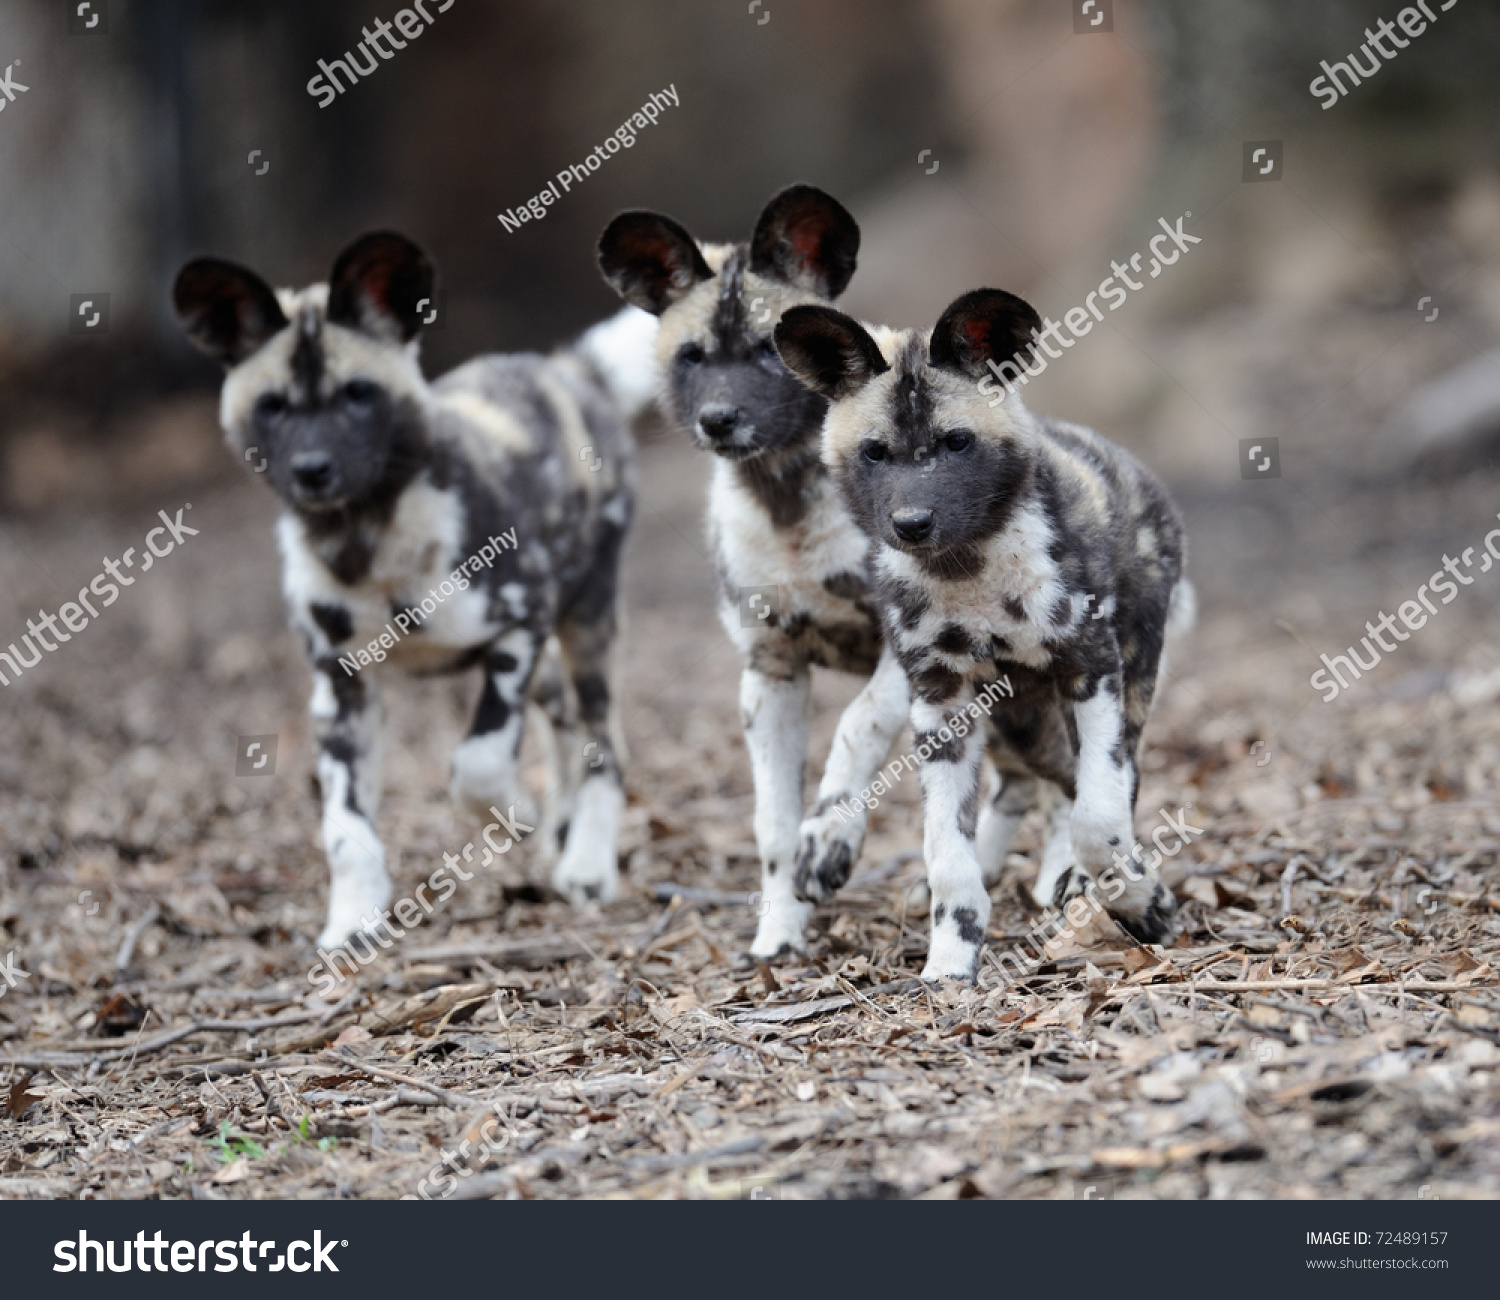 http://image.shutterstock.com/z/stock-photo-three-african-painted-wild-dogs-lycaon-pictus-pups-72489157.jpg